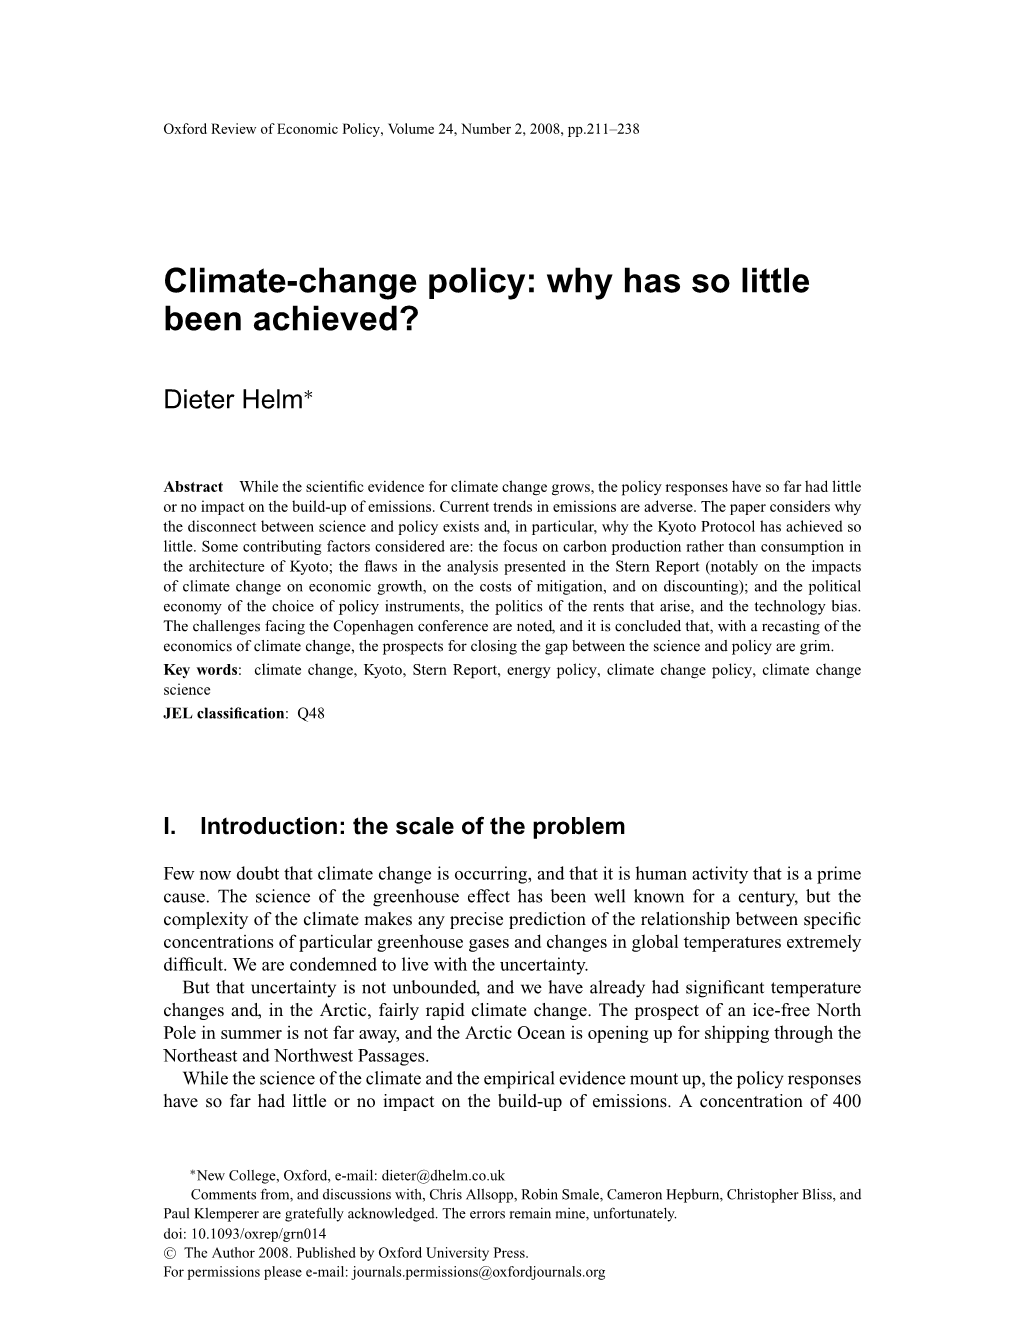 Climate-Change Policy: Why Has So Little Been Achieved?